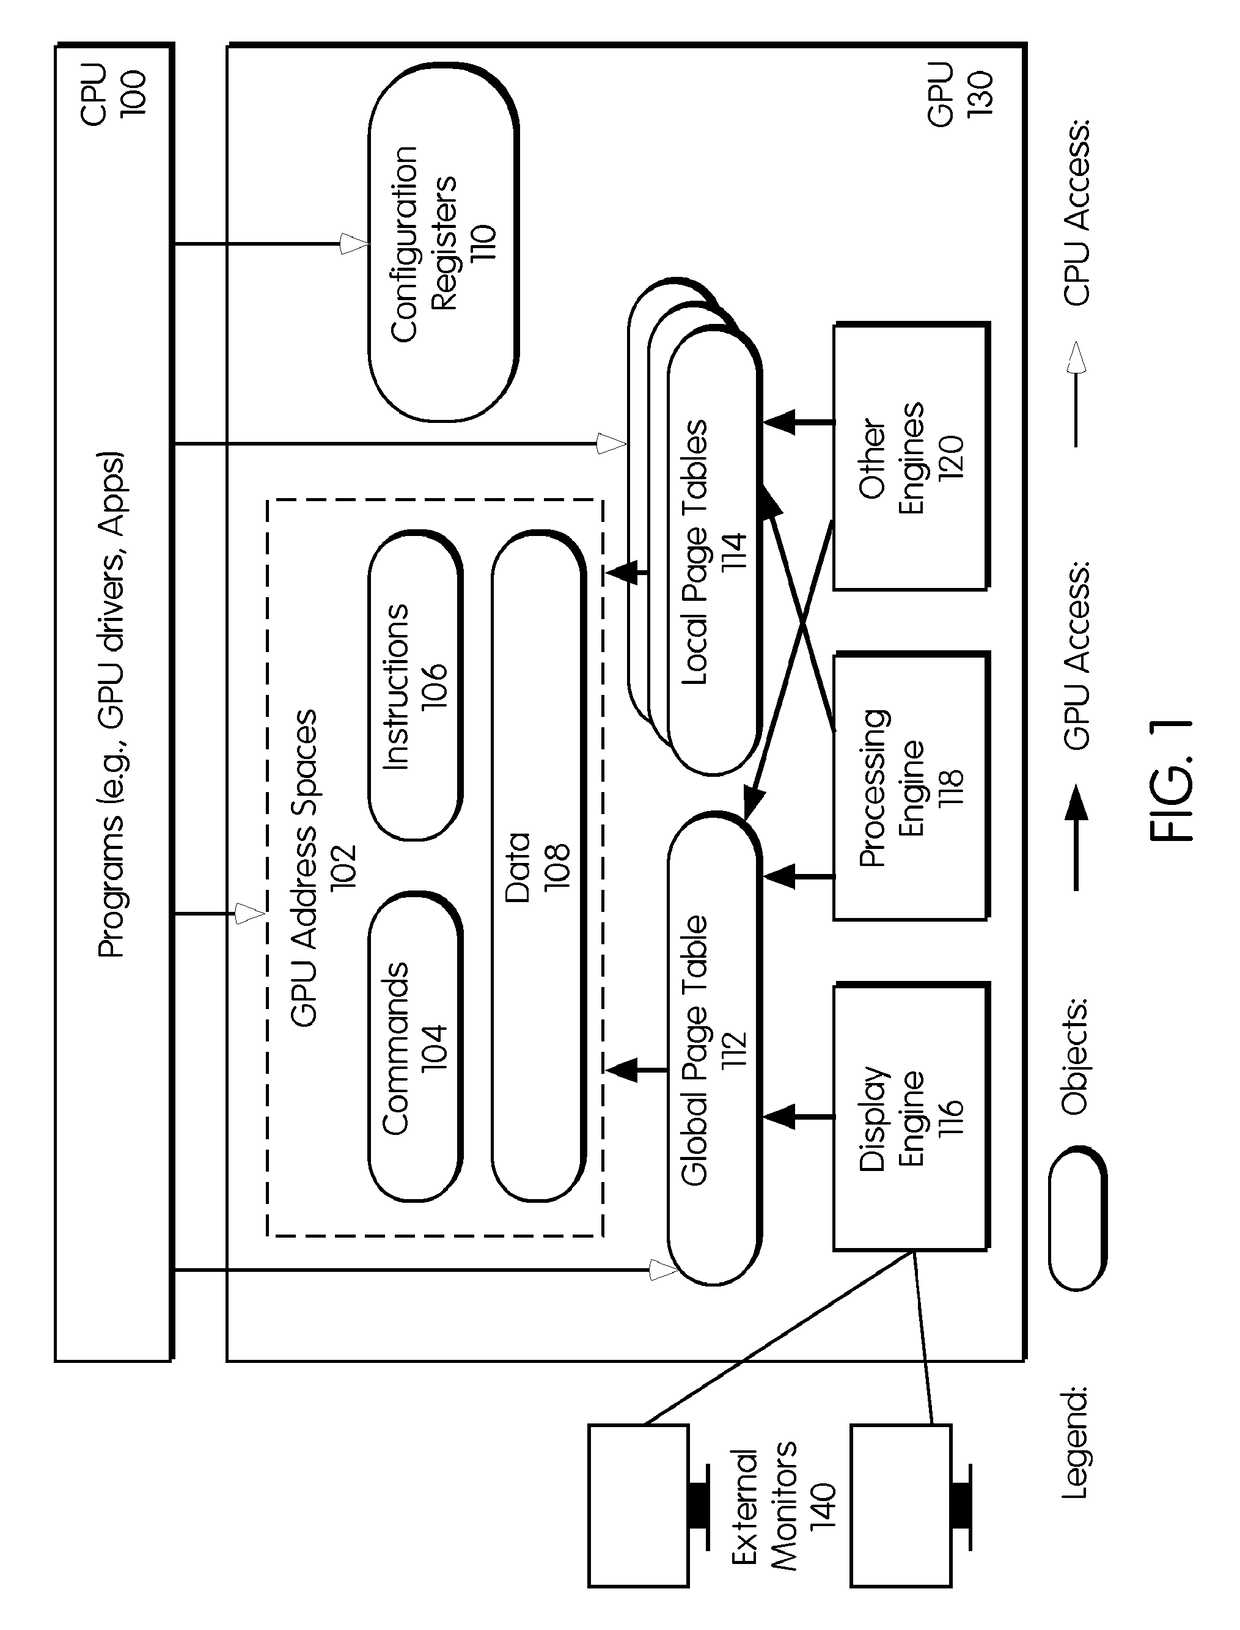 Method and apparatus for trusted display on untrusted computing platforms to secure applications